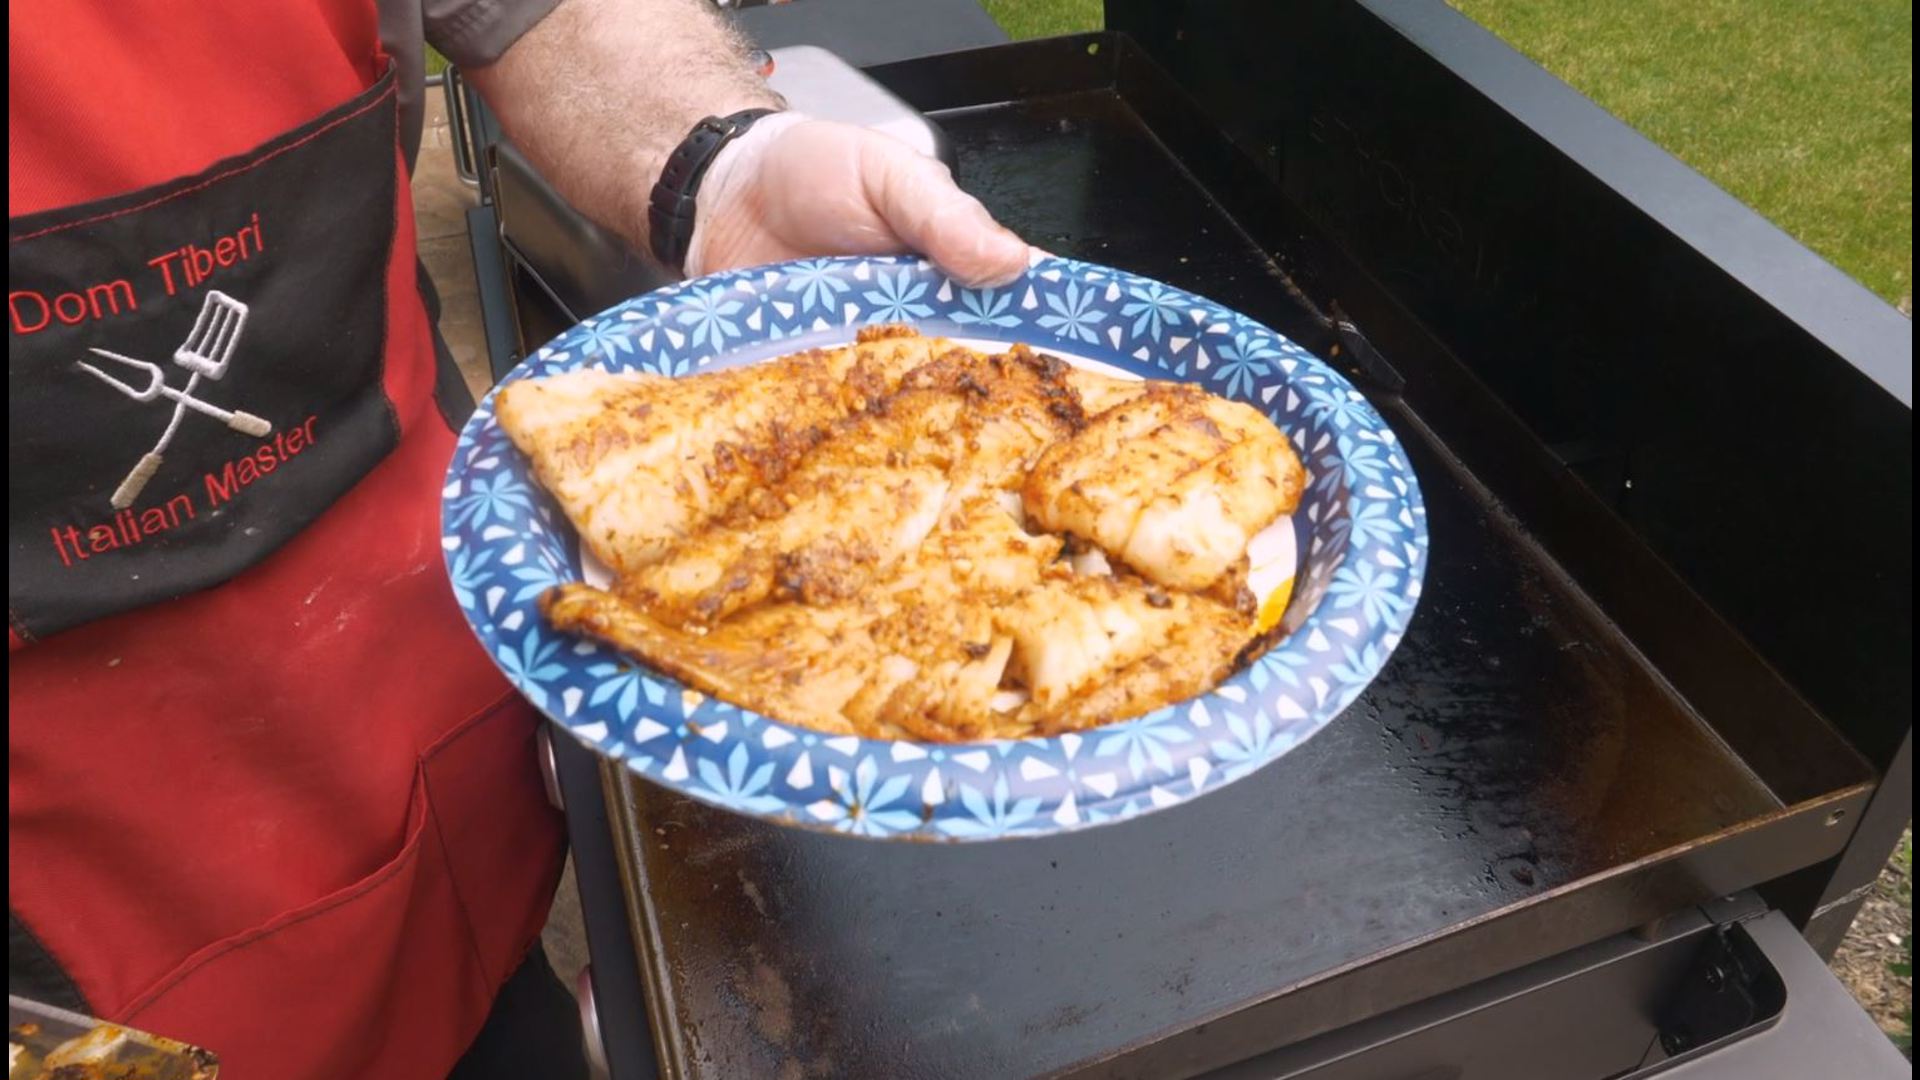 Dom Tiberi shares his recipe for Blackened Cod fish cooked on the griddle - or in a cast iron skillet.